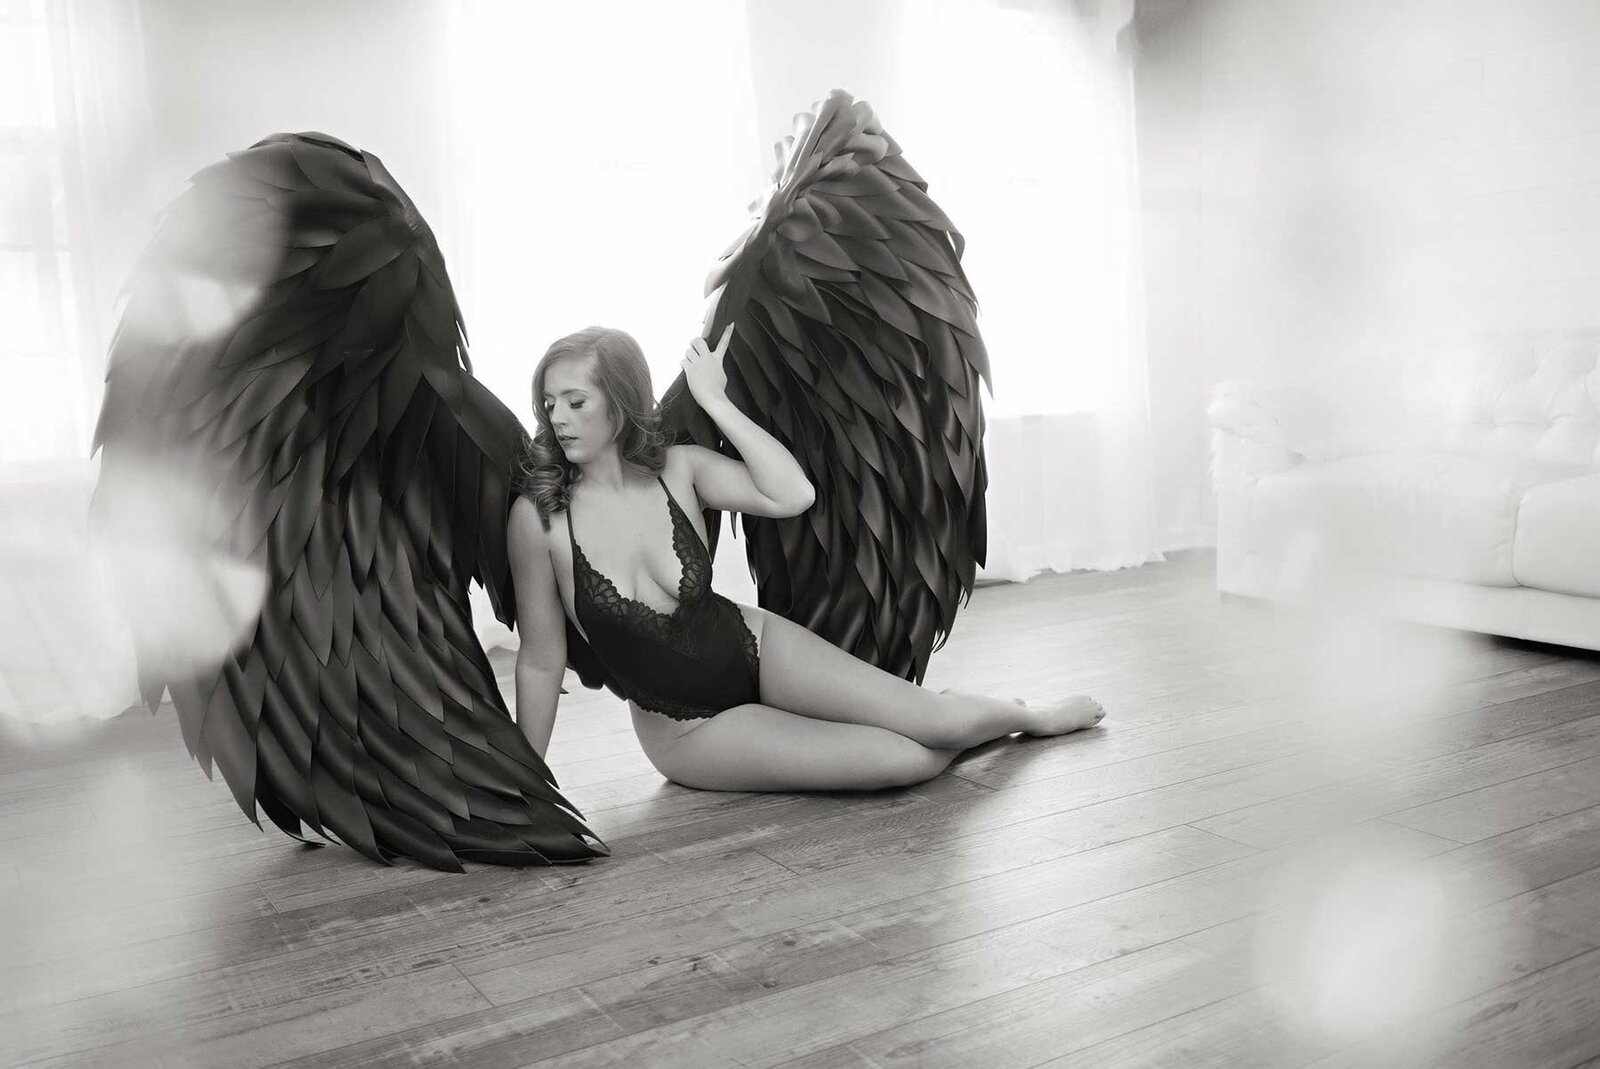 Woman with large boudoir wings posing for portrait